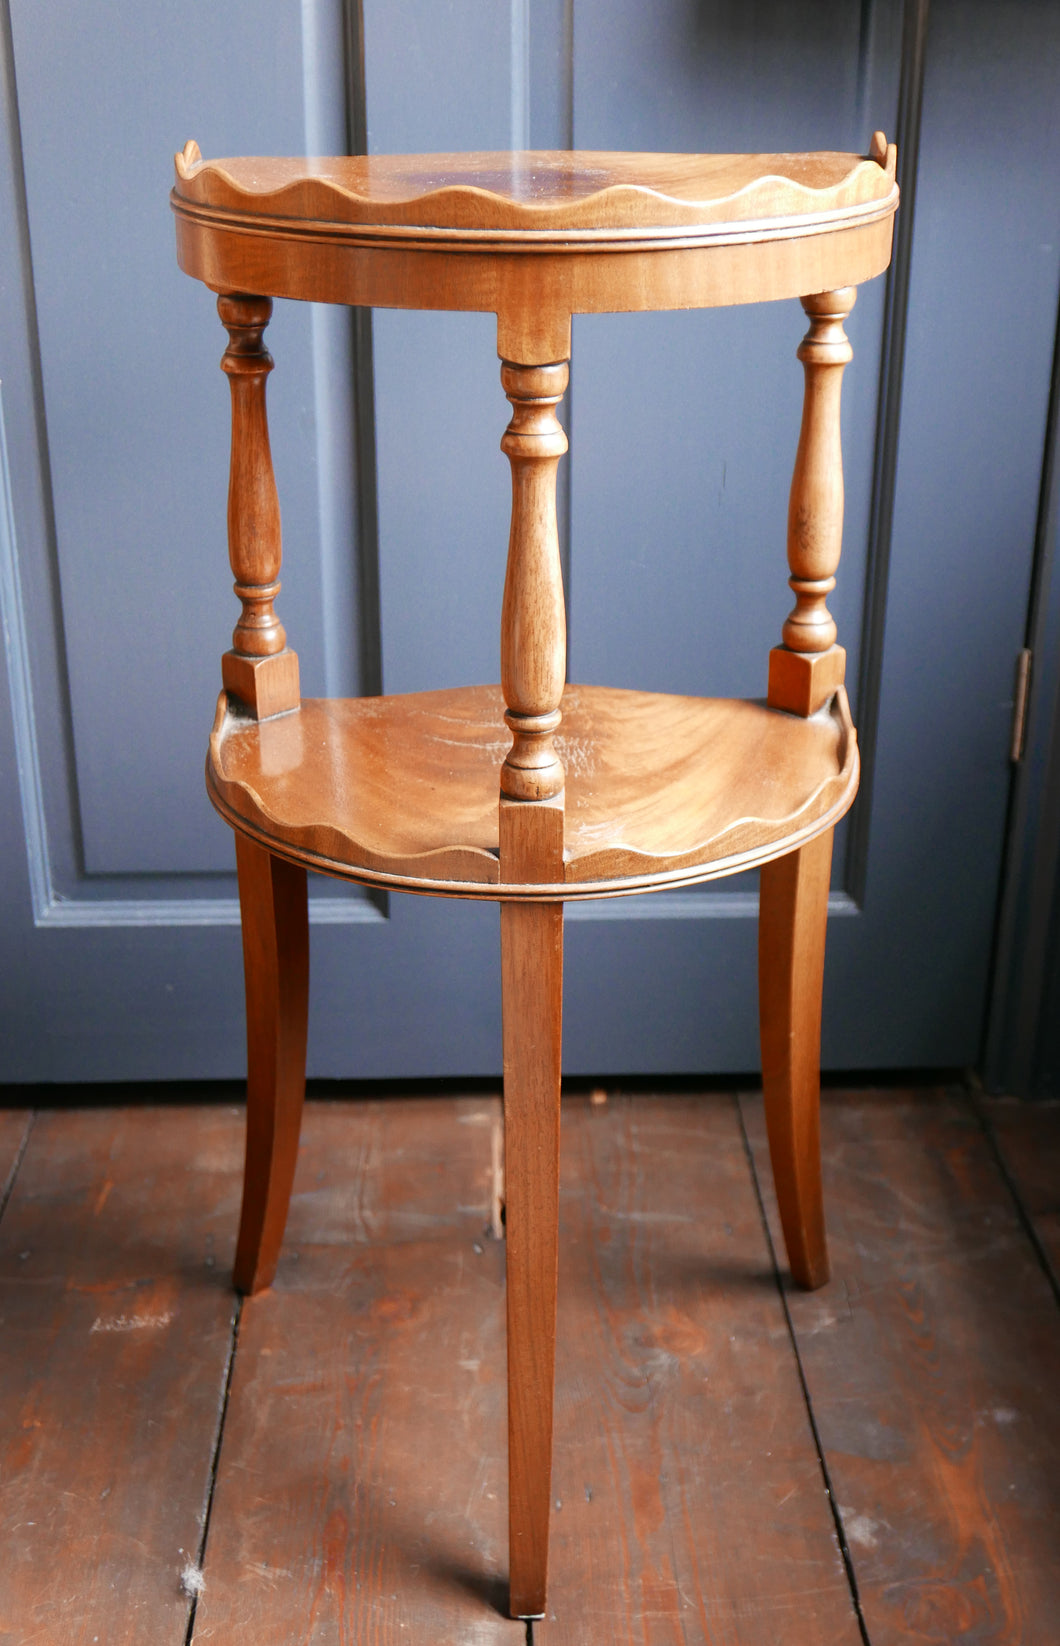 Double Tiered Side Table With Scalloped Edge